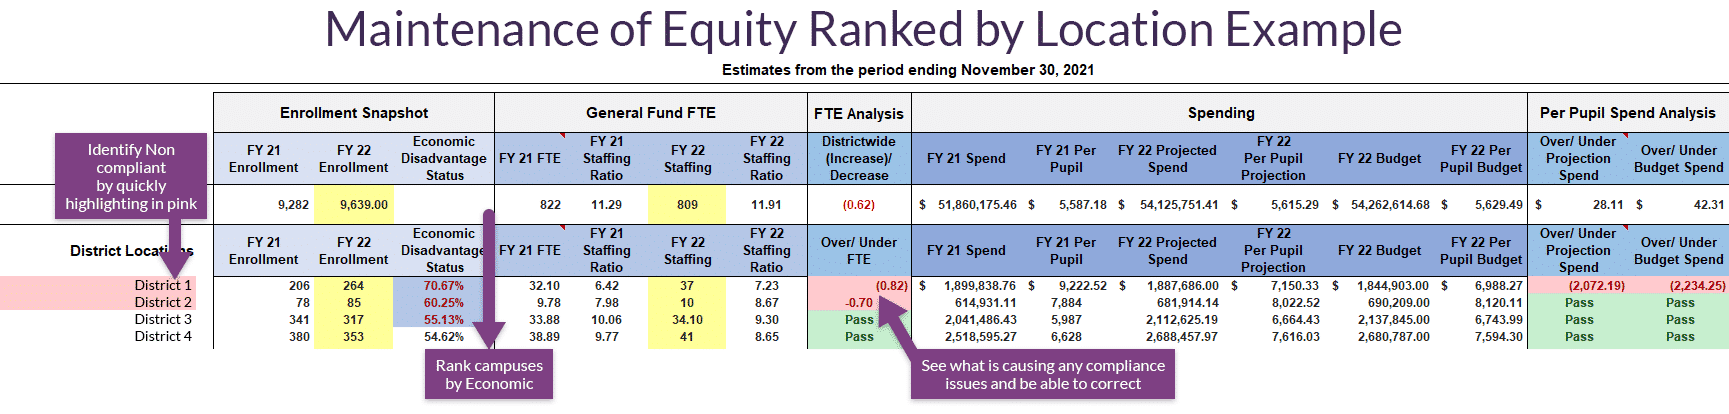 Maintenance of Equity Ranked